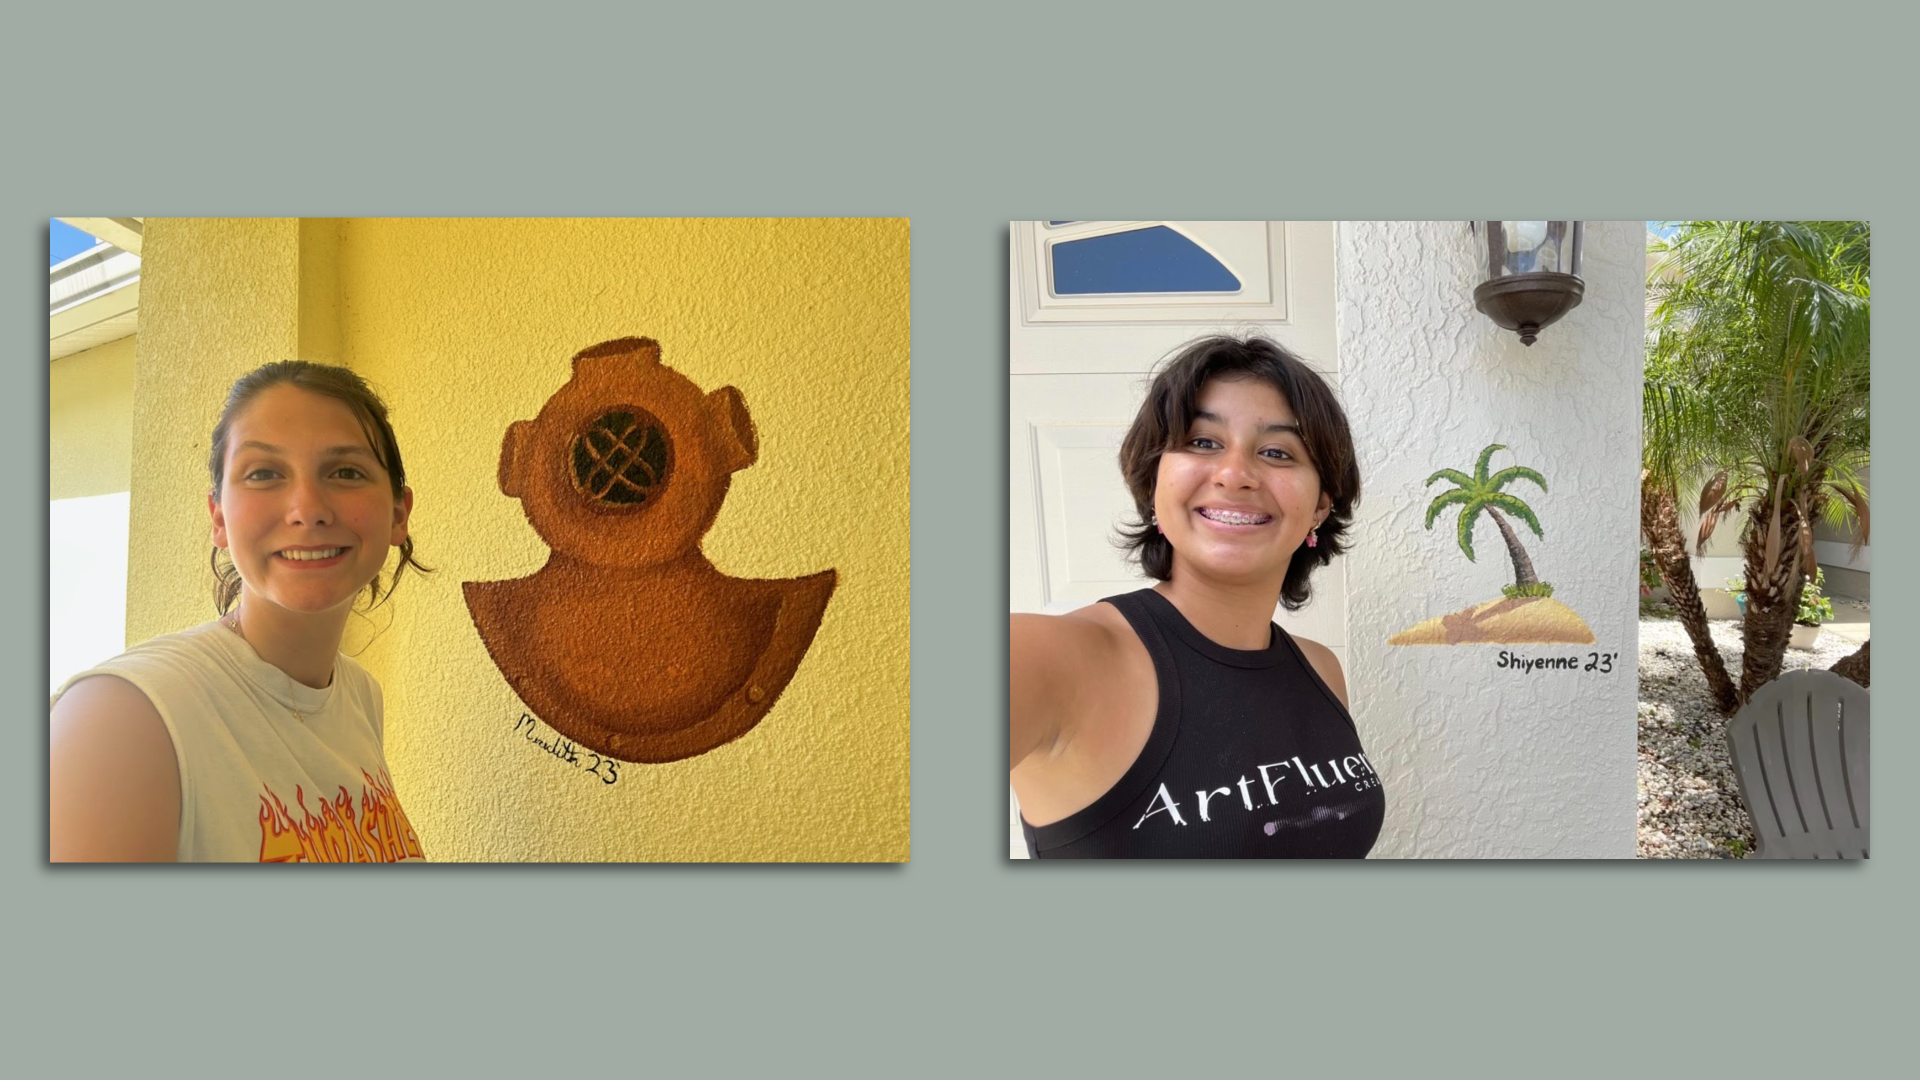 On left, a smiling woman poses with a painting of a bronze sponge-diver helmet. On right, a different smiling woman poses with a palm tree painting.